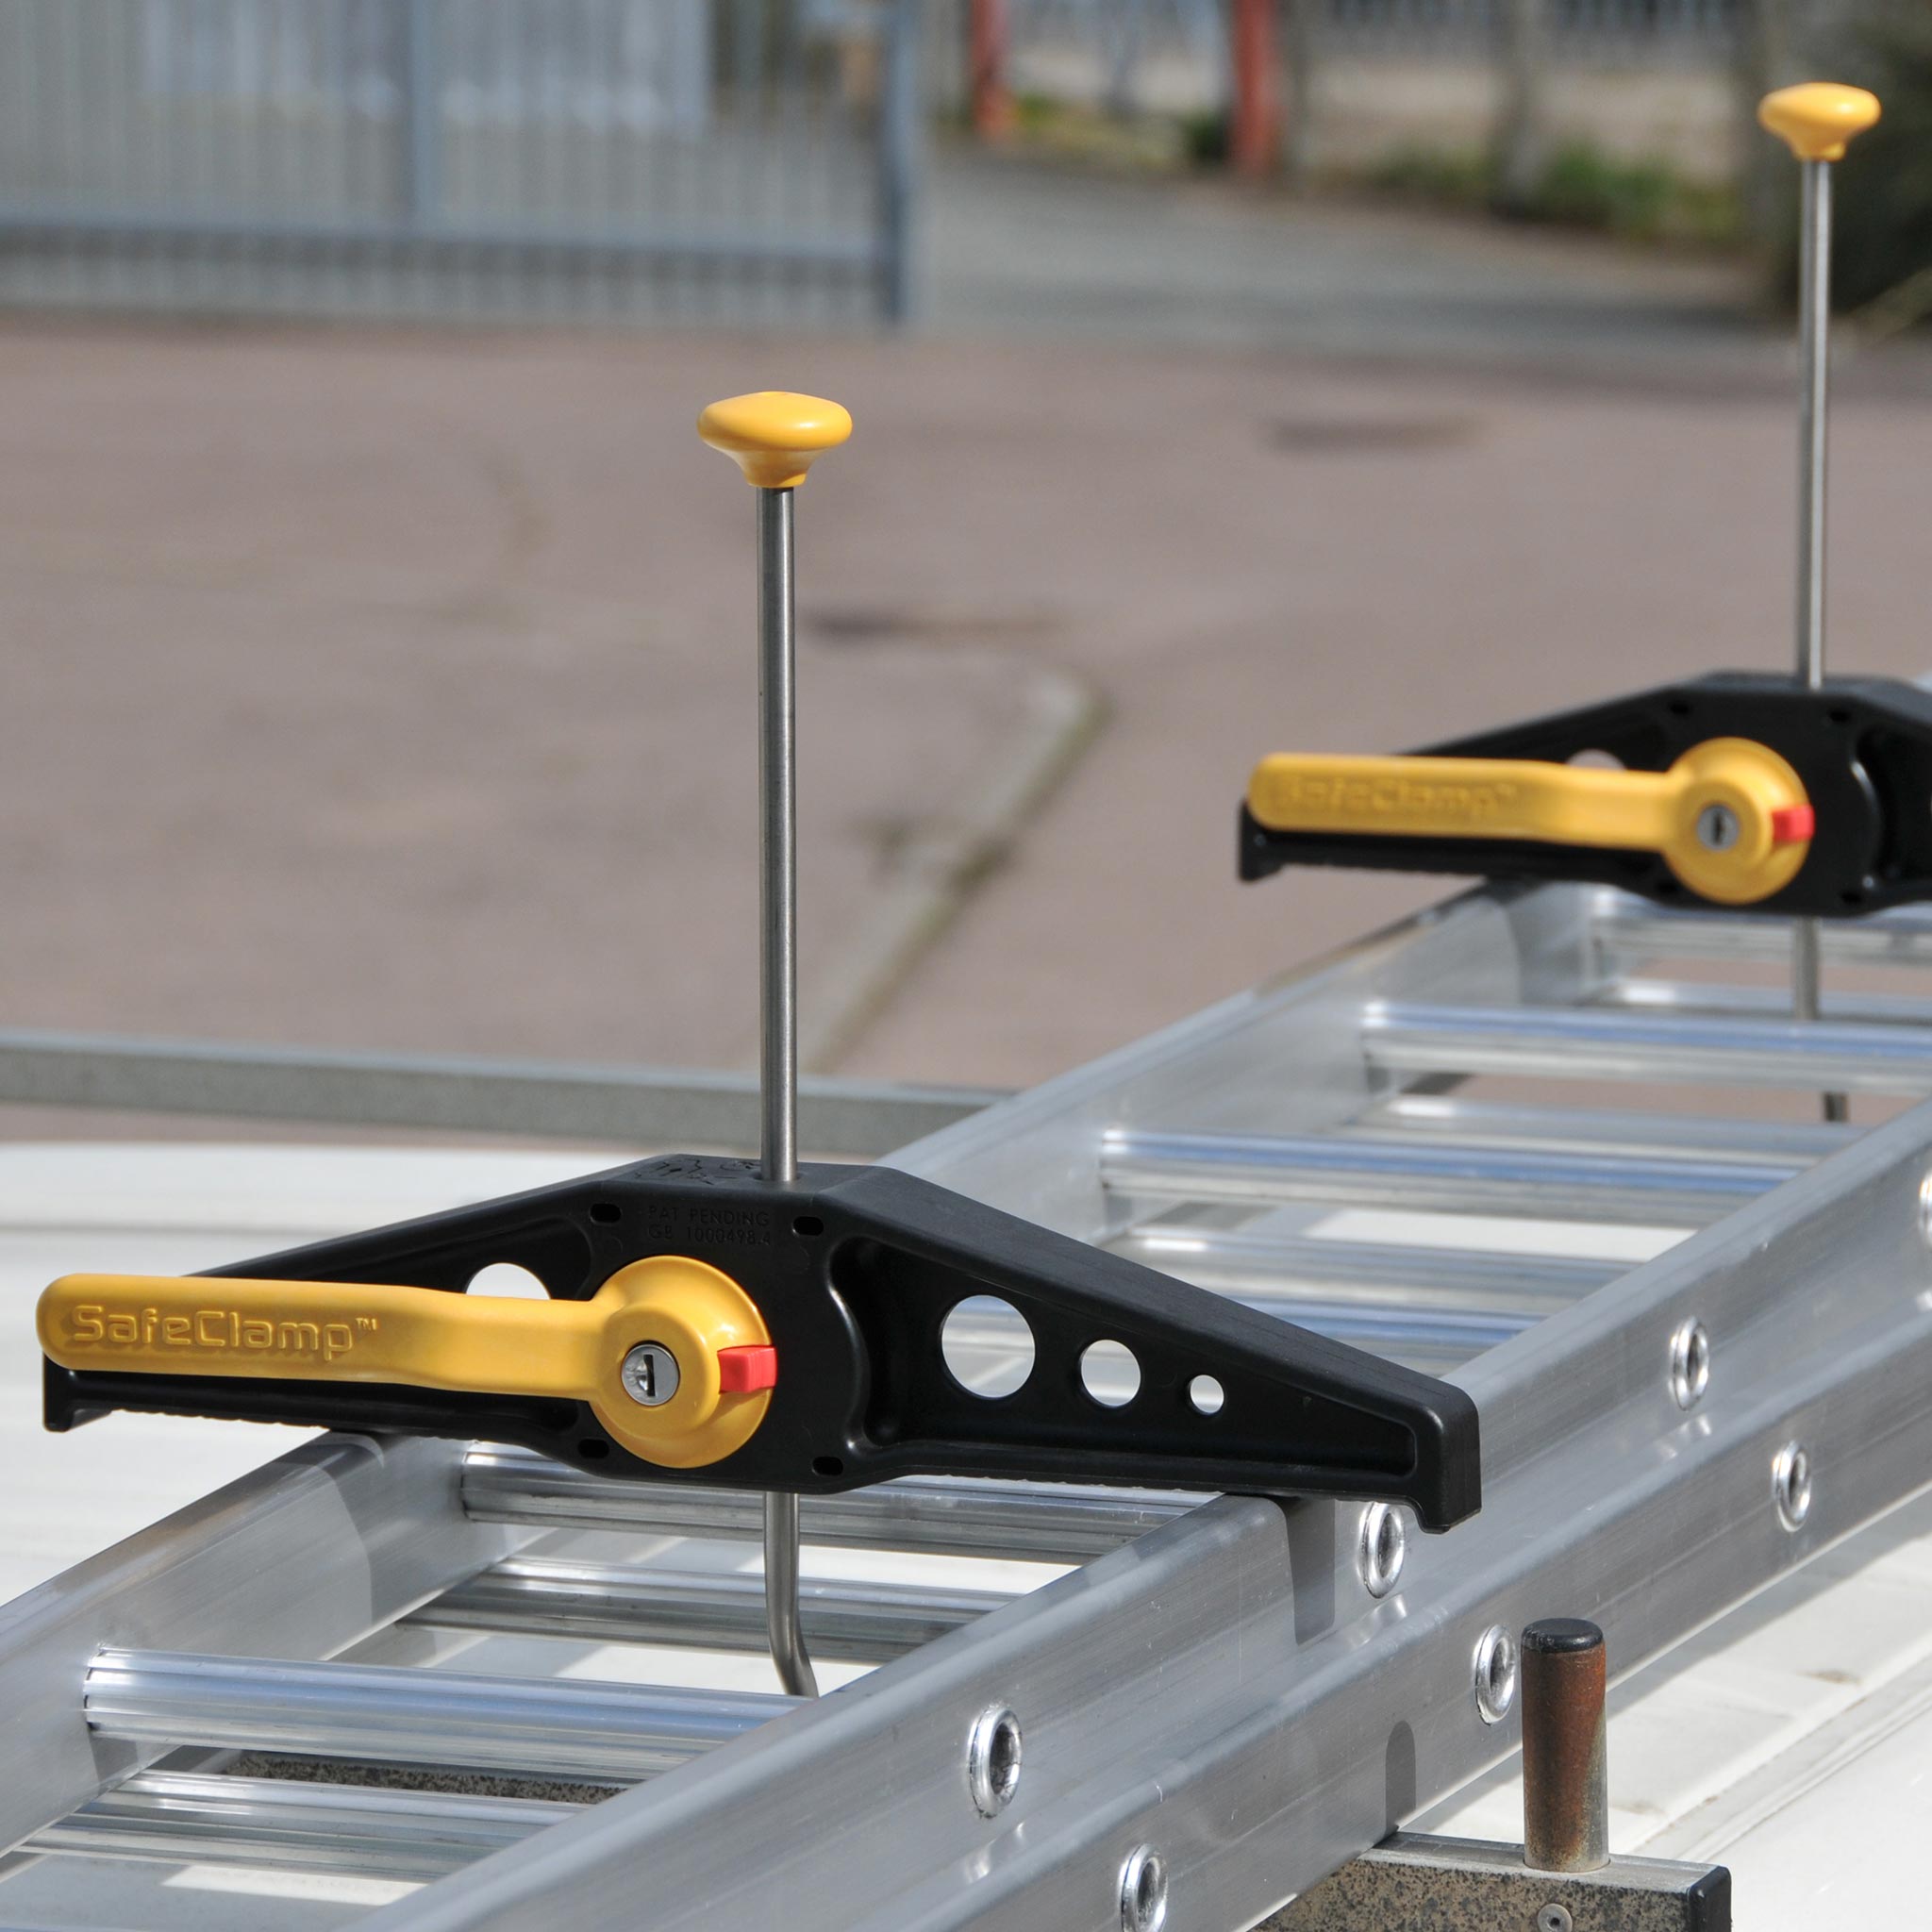 SafeClamp – Ladder Clamps